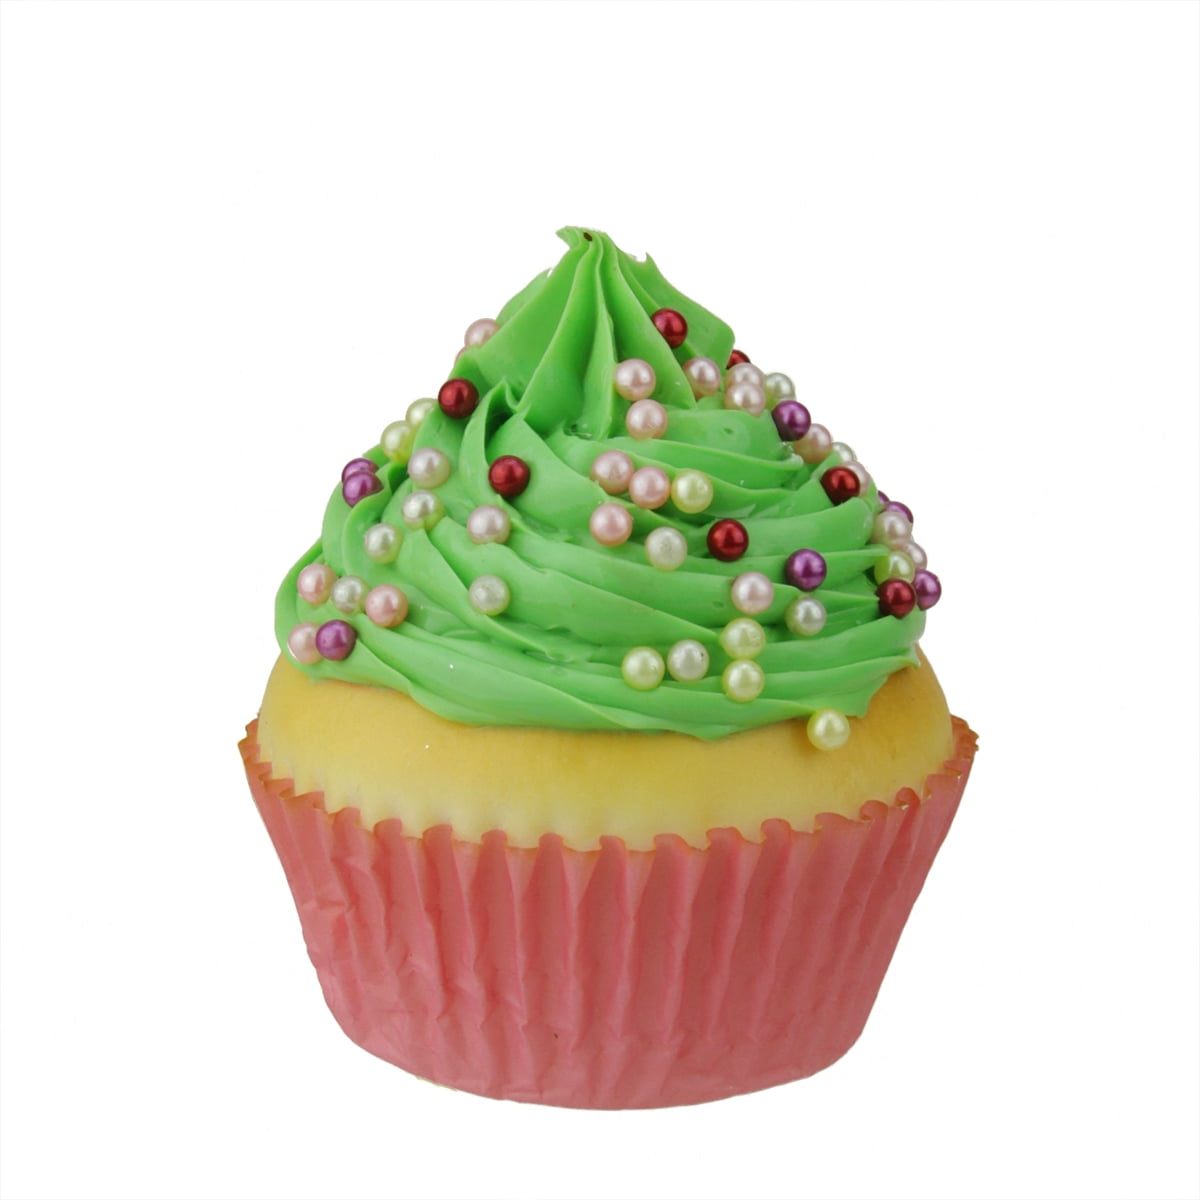 Cupcake with Sprinkles Ornament Set of 6